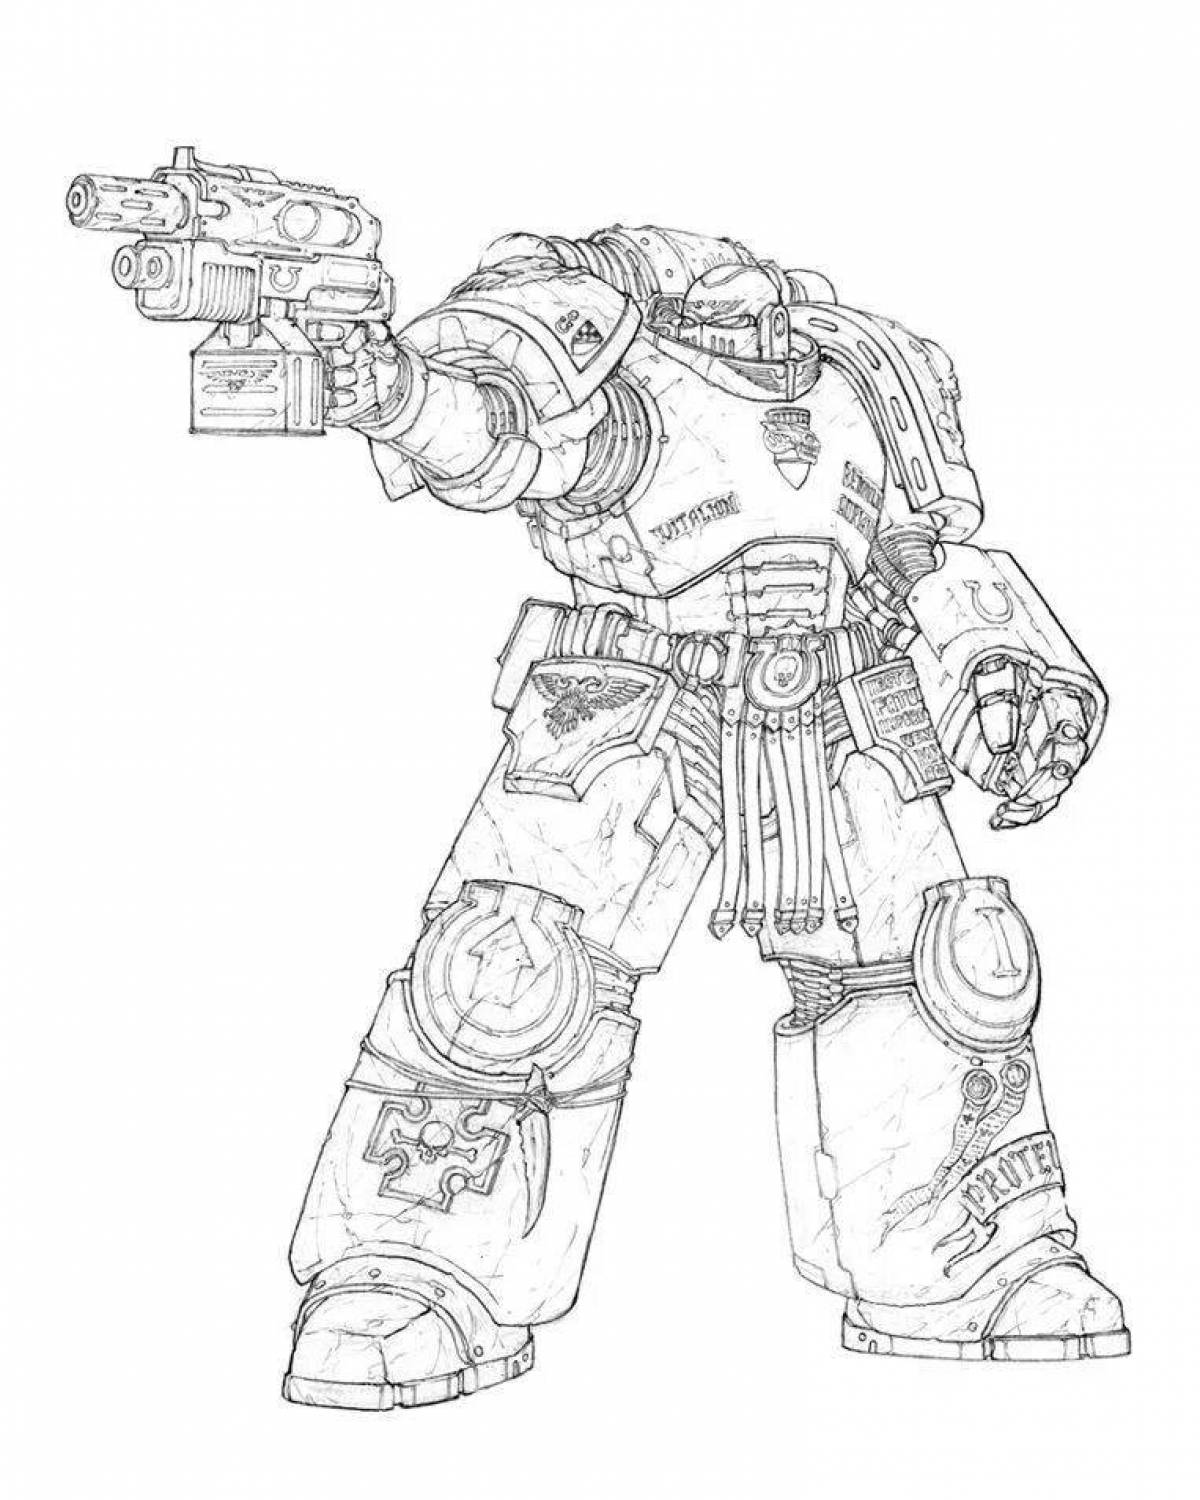 Warhammer deluxe coloring book